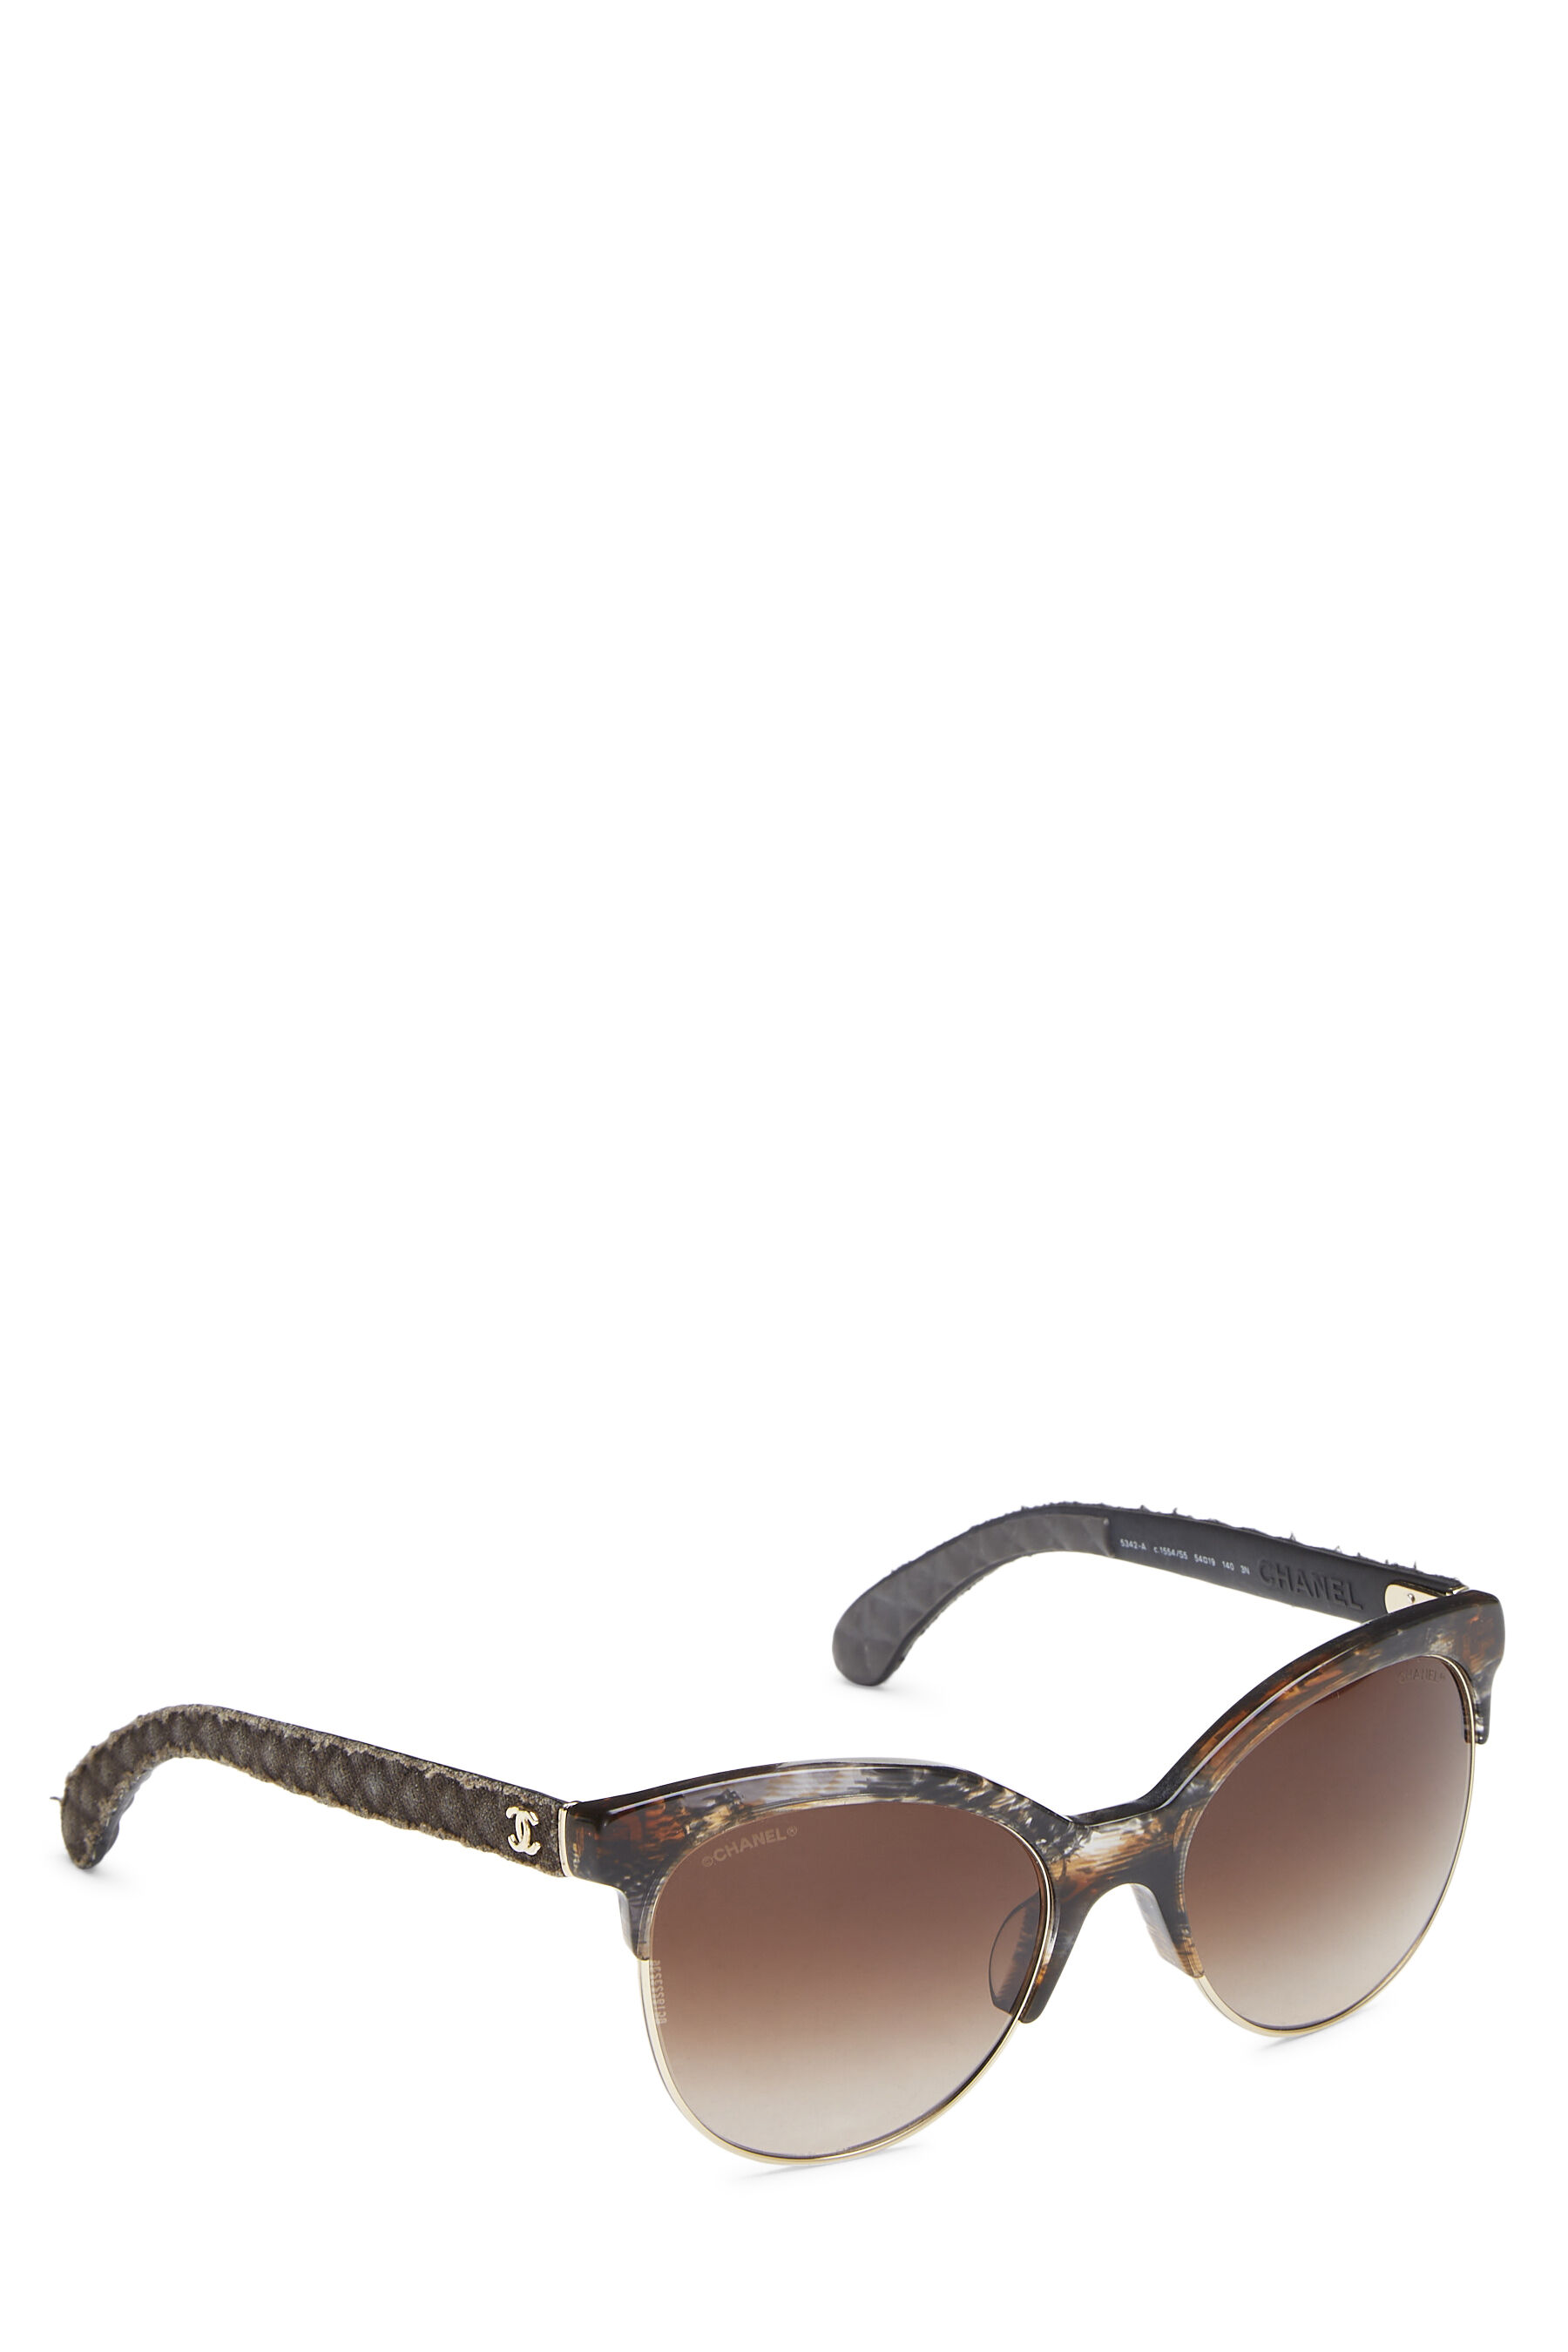 Chanel Brown Acetate & Quilted Denim Sunglasses Q6A3Z5L40B000